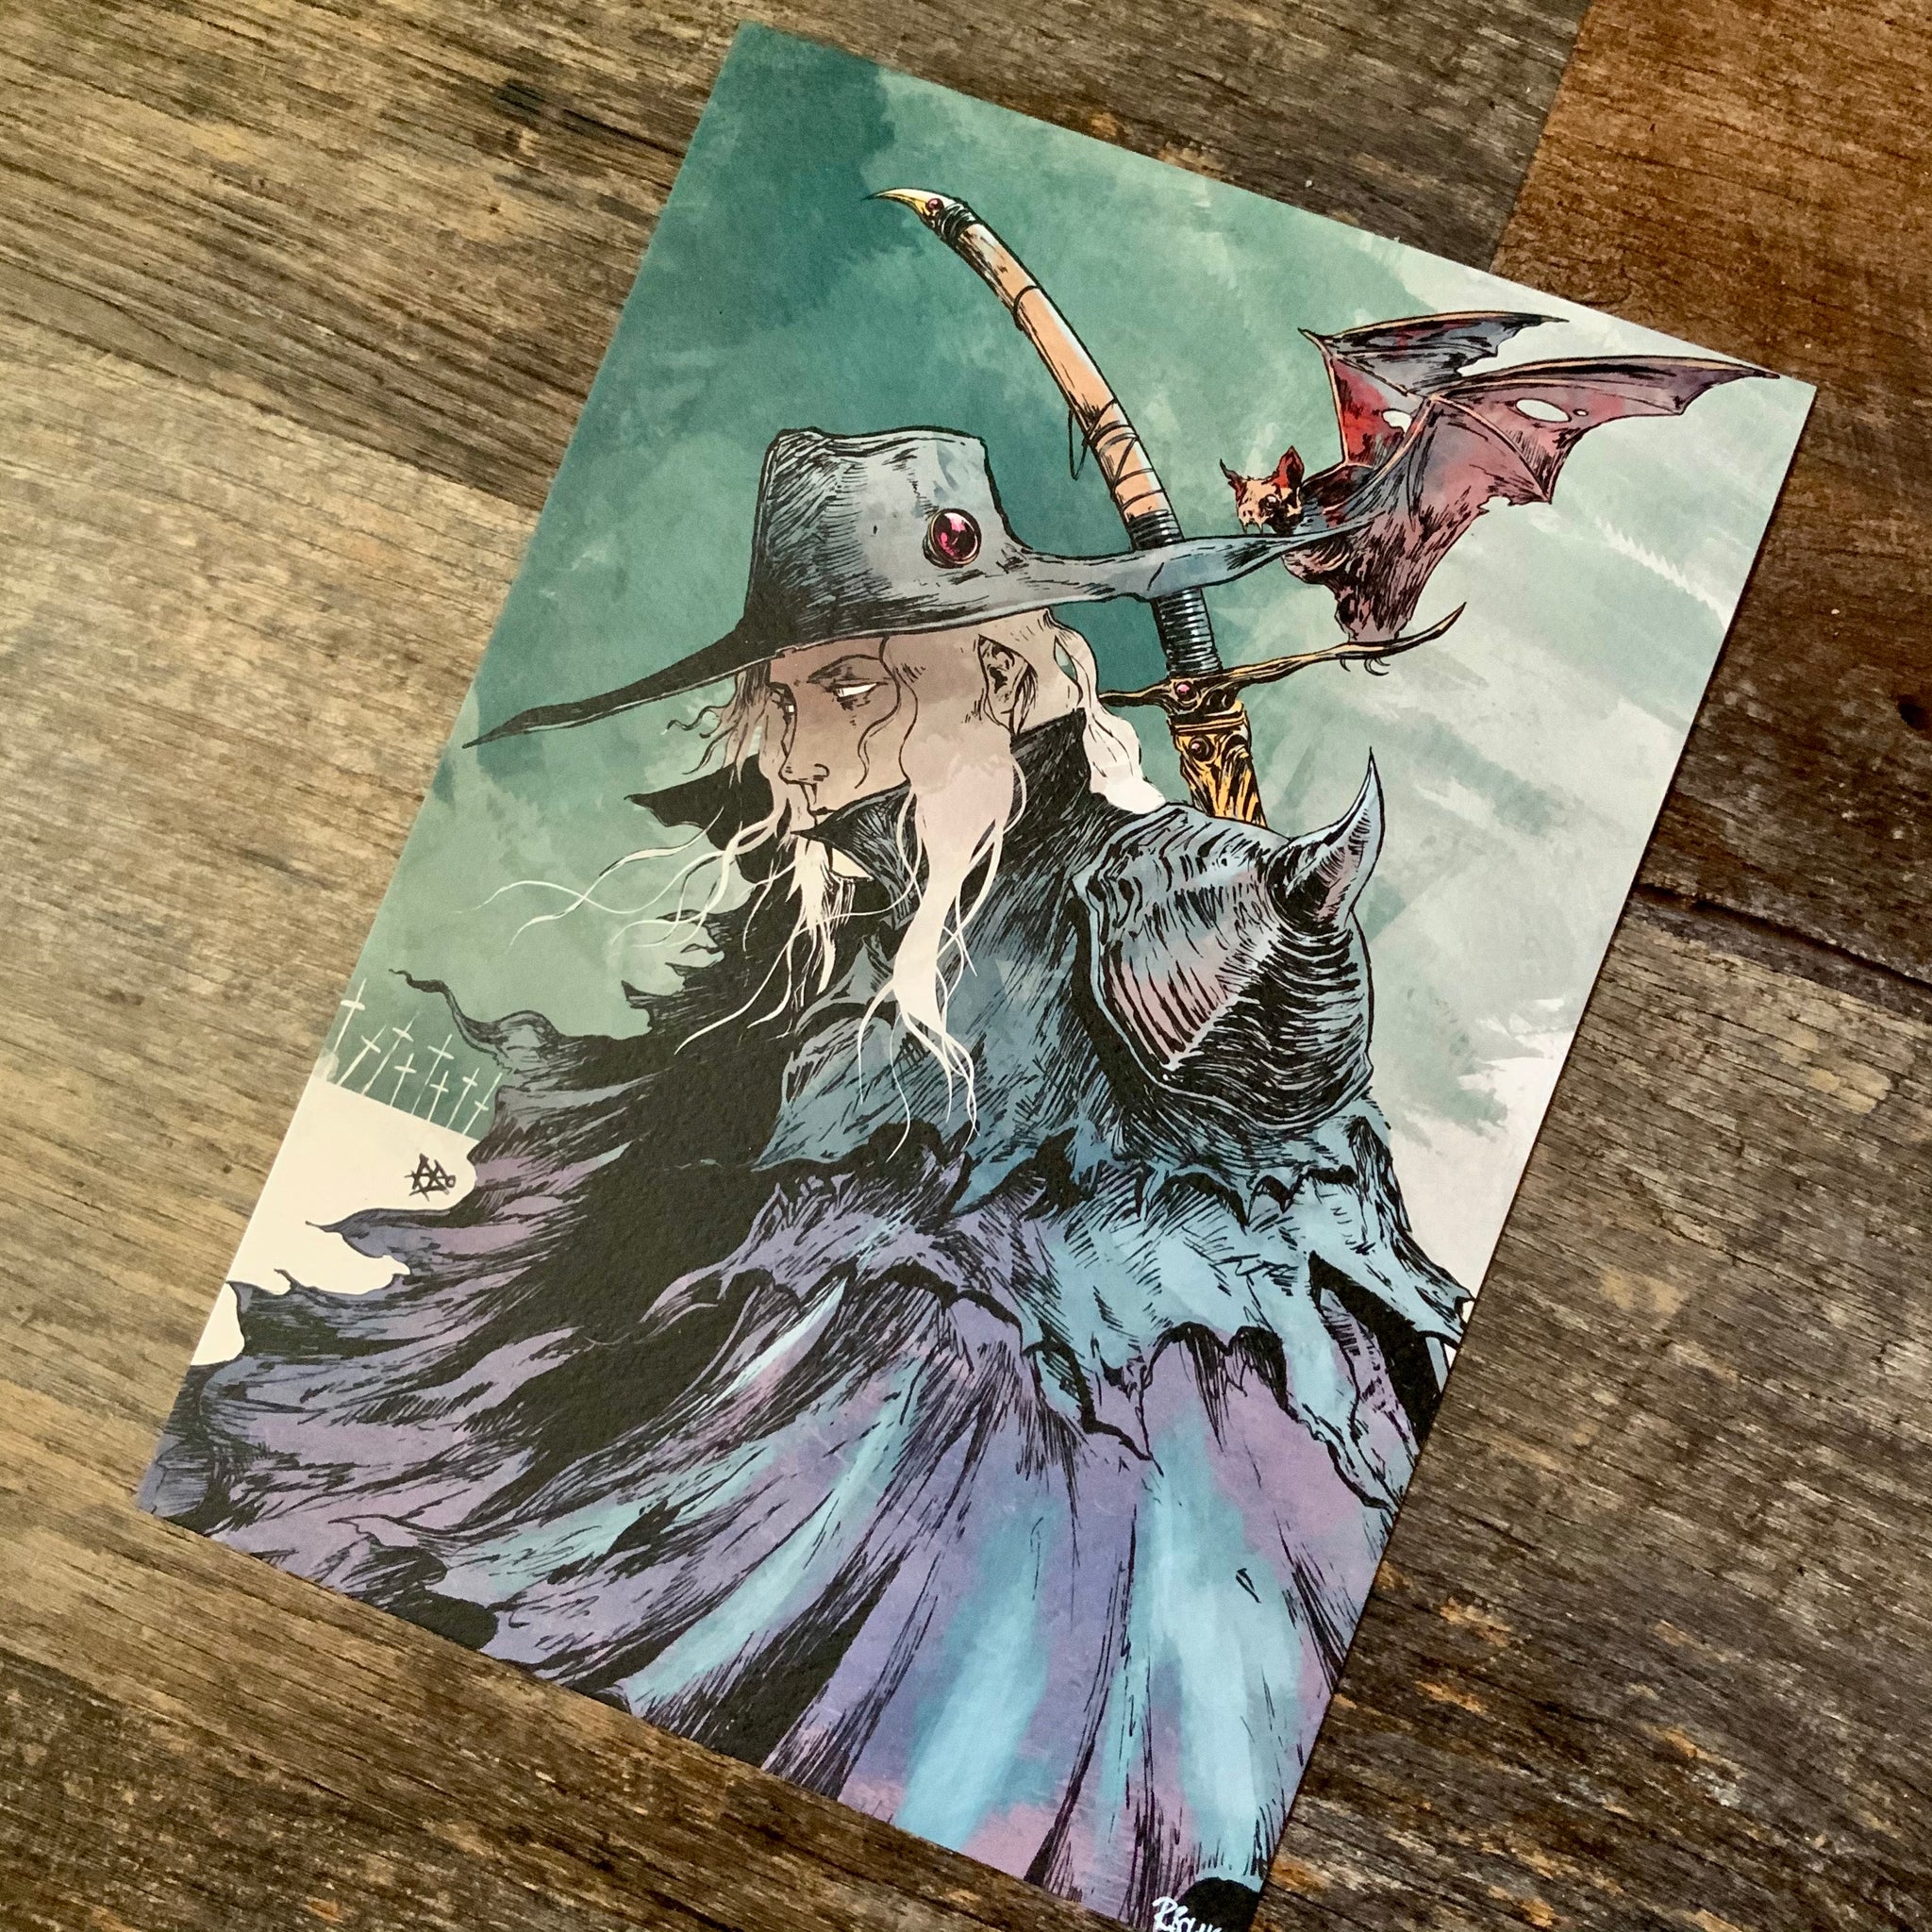 Elden Ring Ranni the Witch A4 Print Fan Art Watercolor 